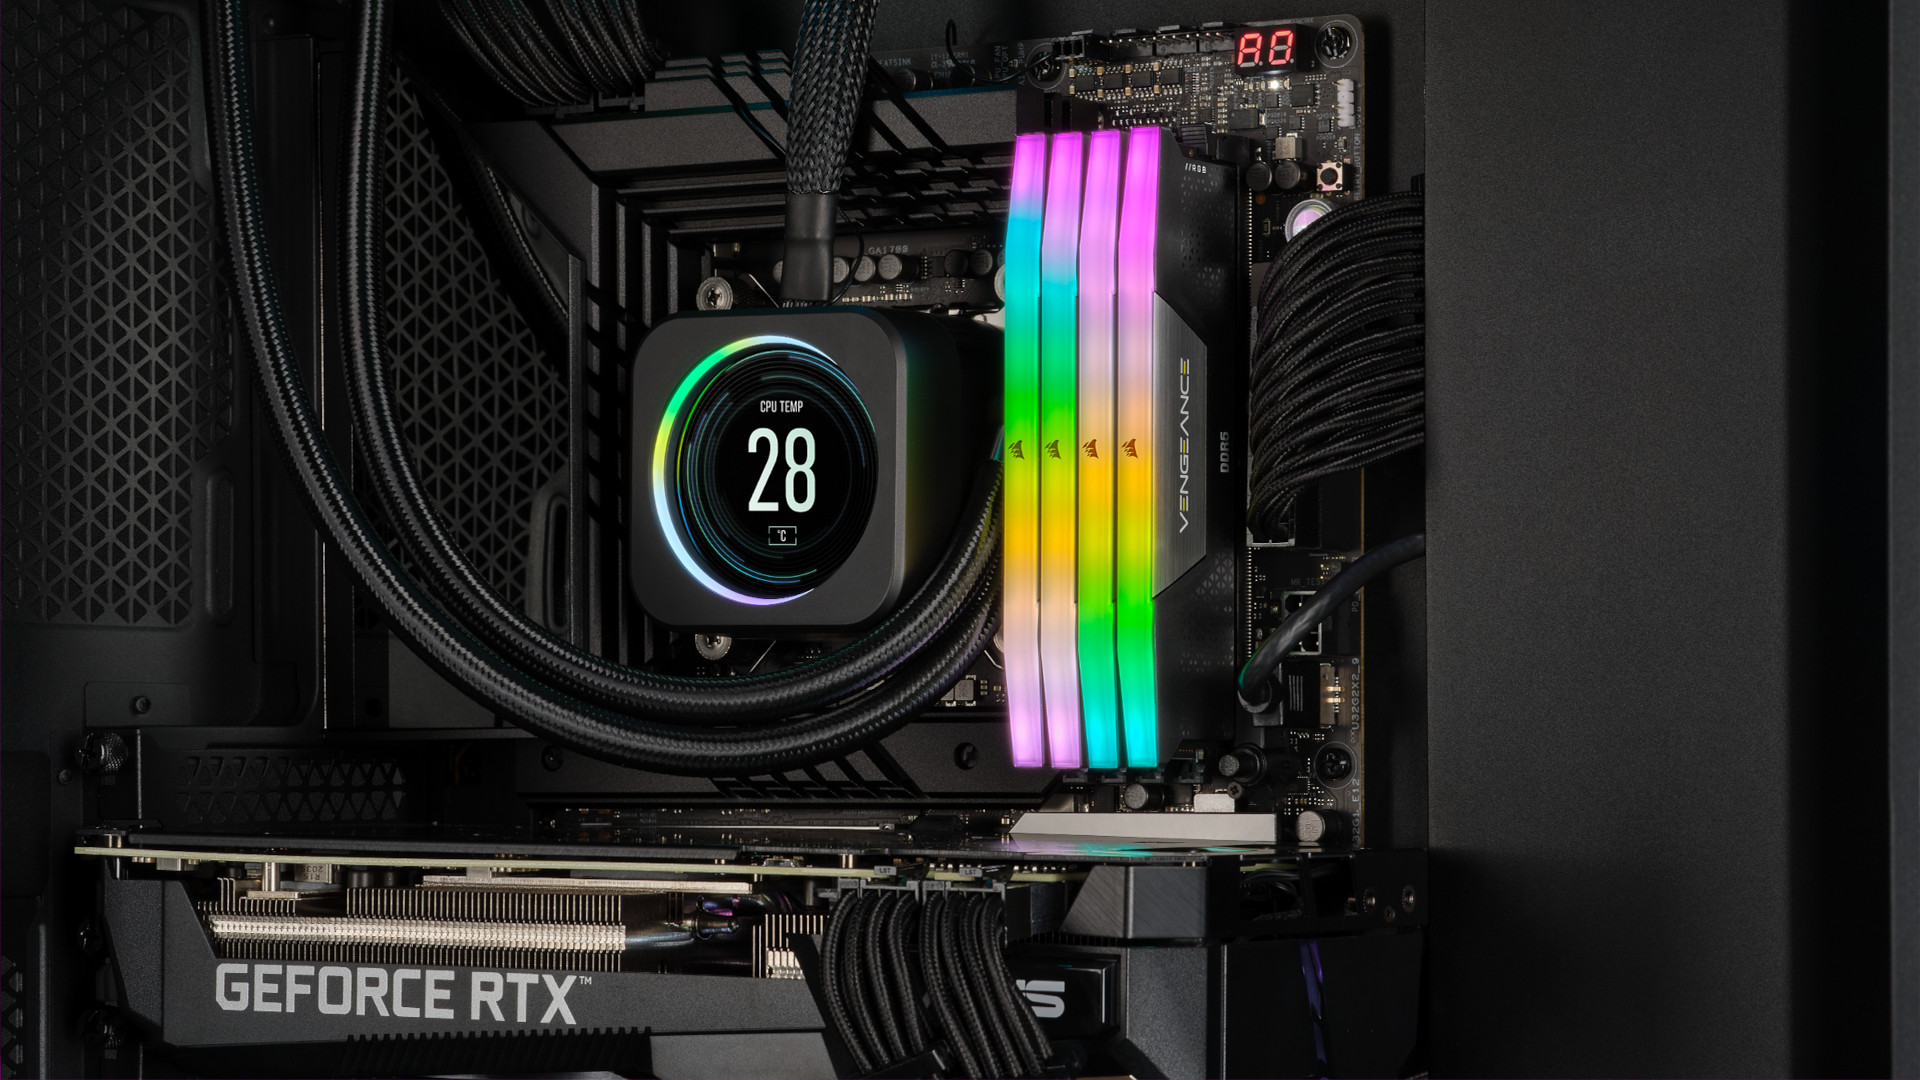 Corsair Vengeance DDR5 gaming RAM is now available with RGB